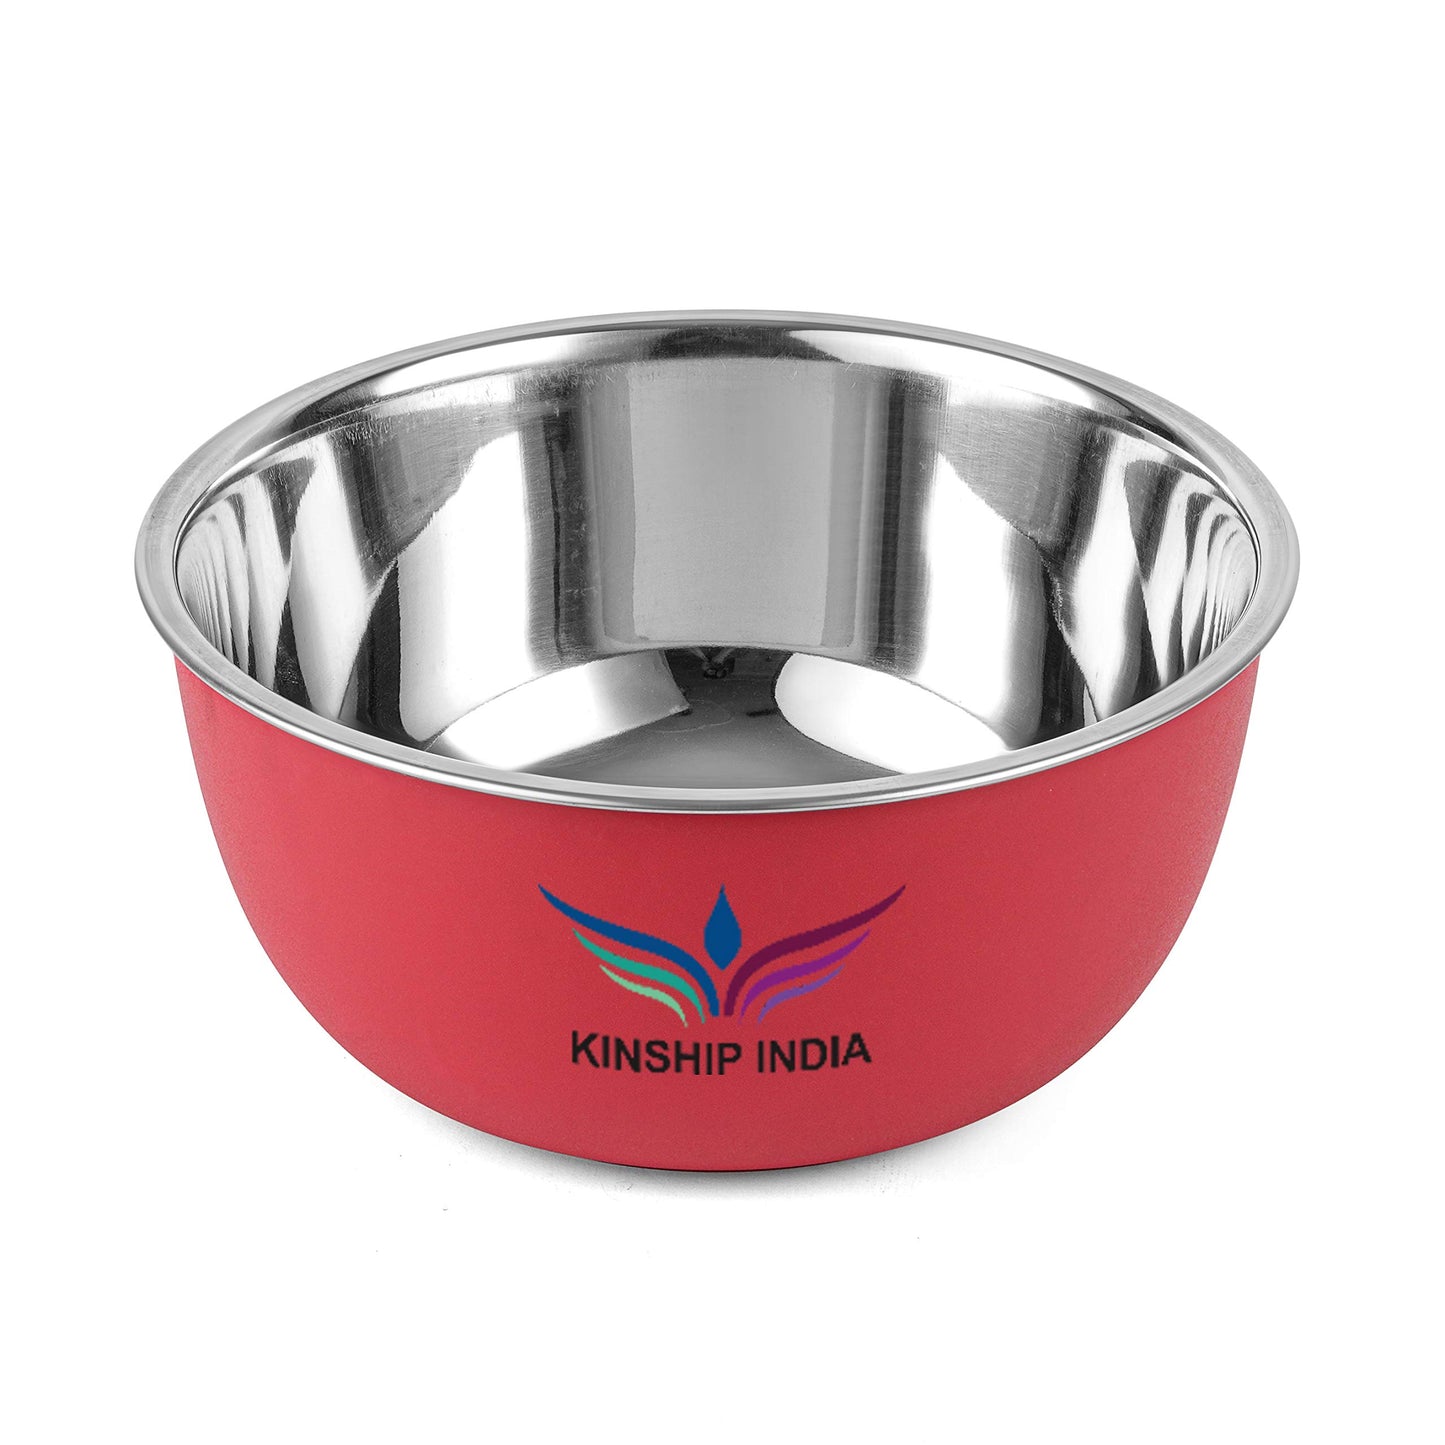 Microwave Safe Stainless Steel Plastic Coated Euro Bowl (450,700,1200 and 2000ml),Set of 4(Red)